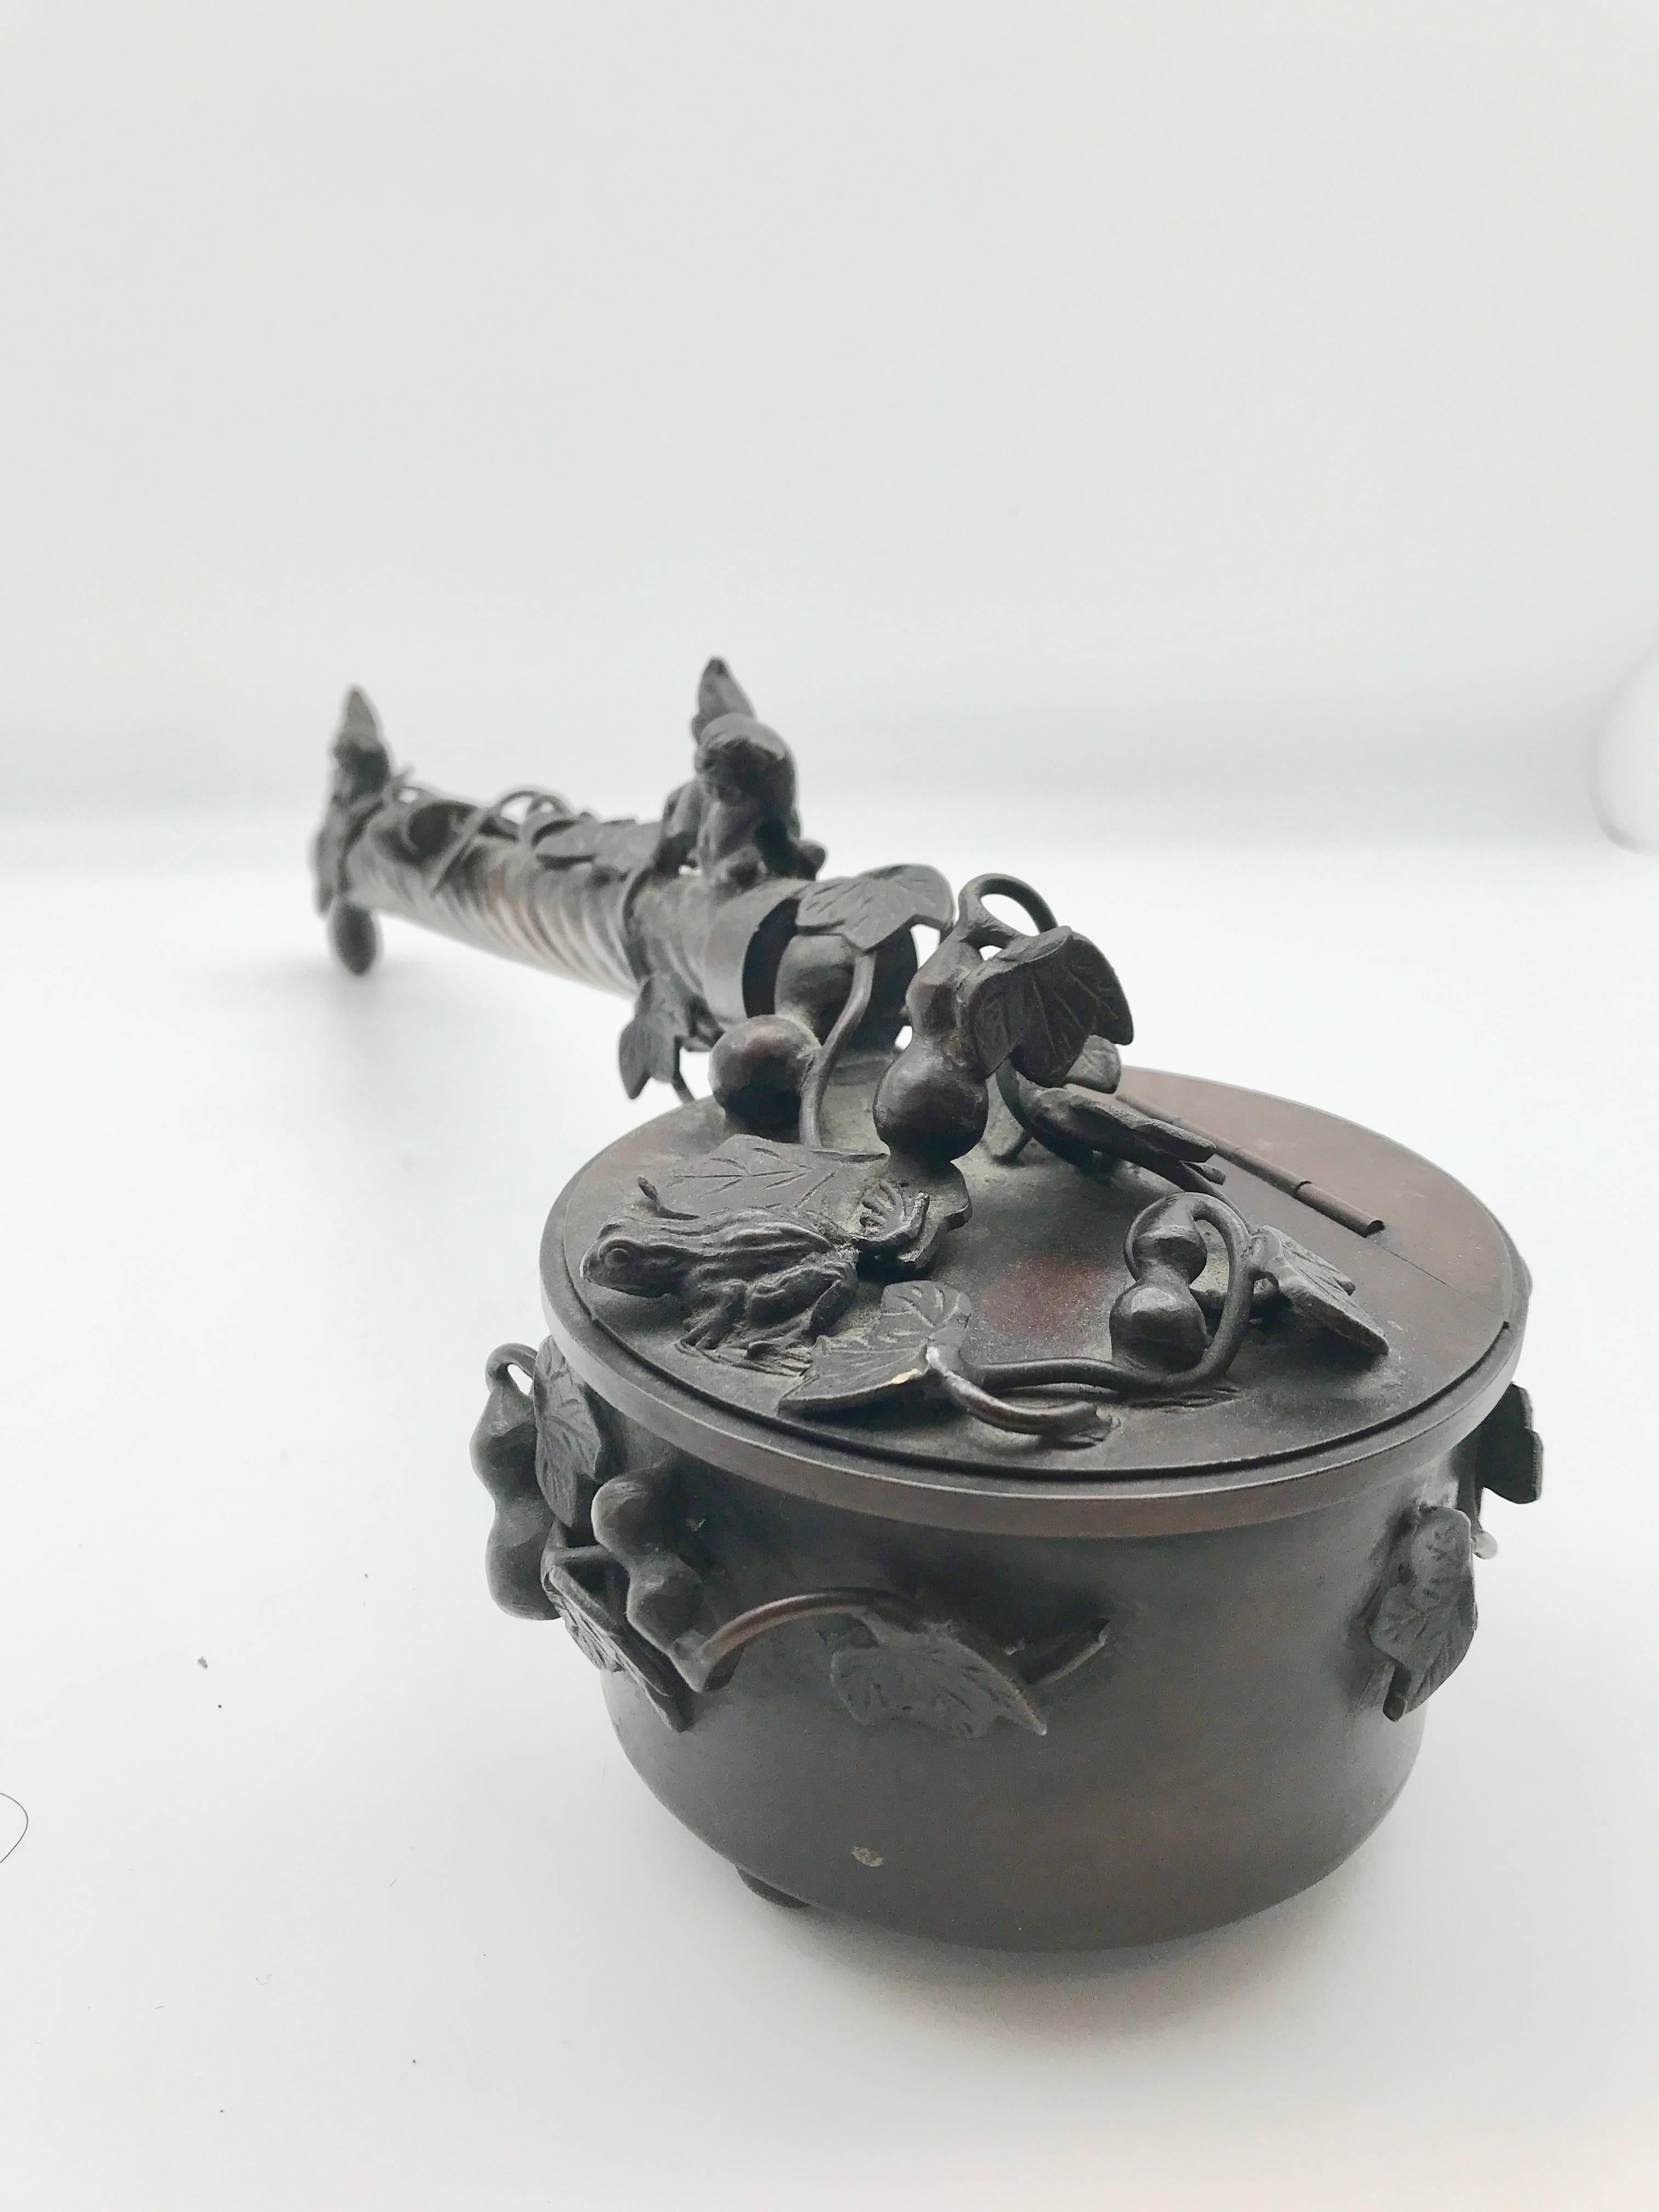 Antique Japanese Yatate bronze calligraphy box. Shishi dogs, leaves, vines, and gourds can be found on the long handle that ends with a hook to hang from a scholar's belt. The decorated lid features a charming frog as well.